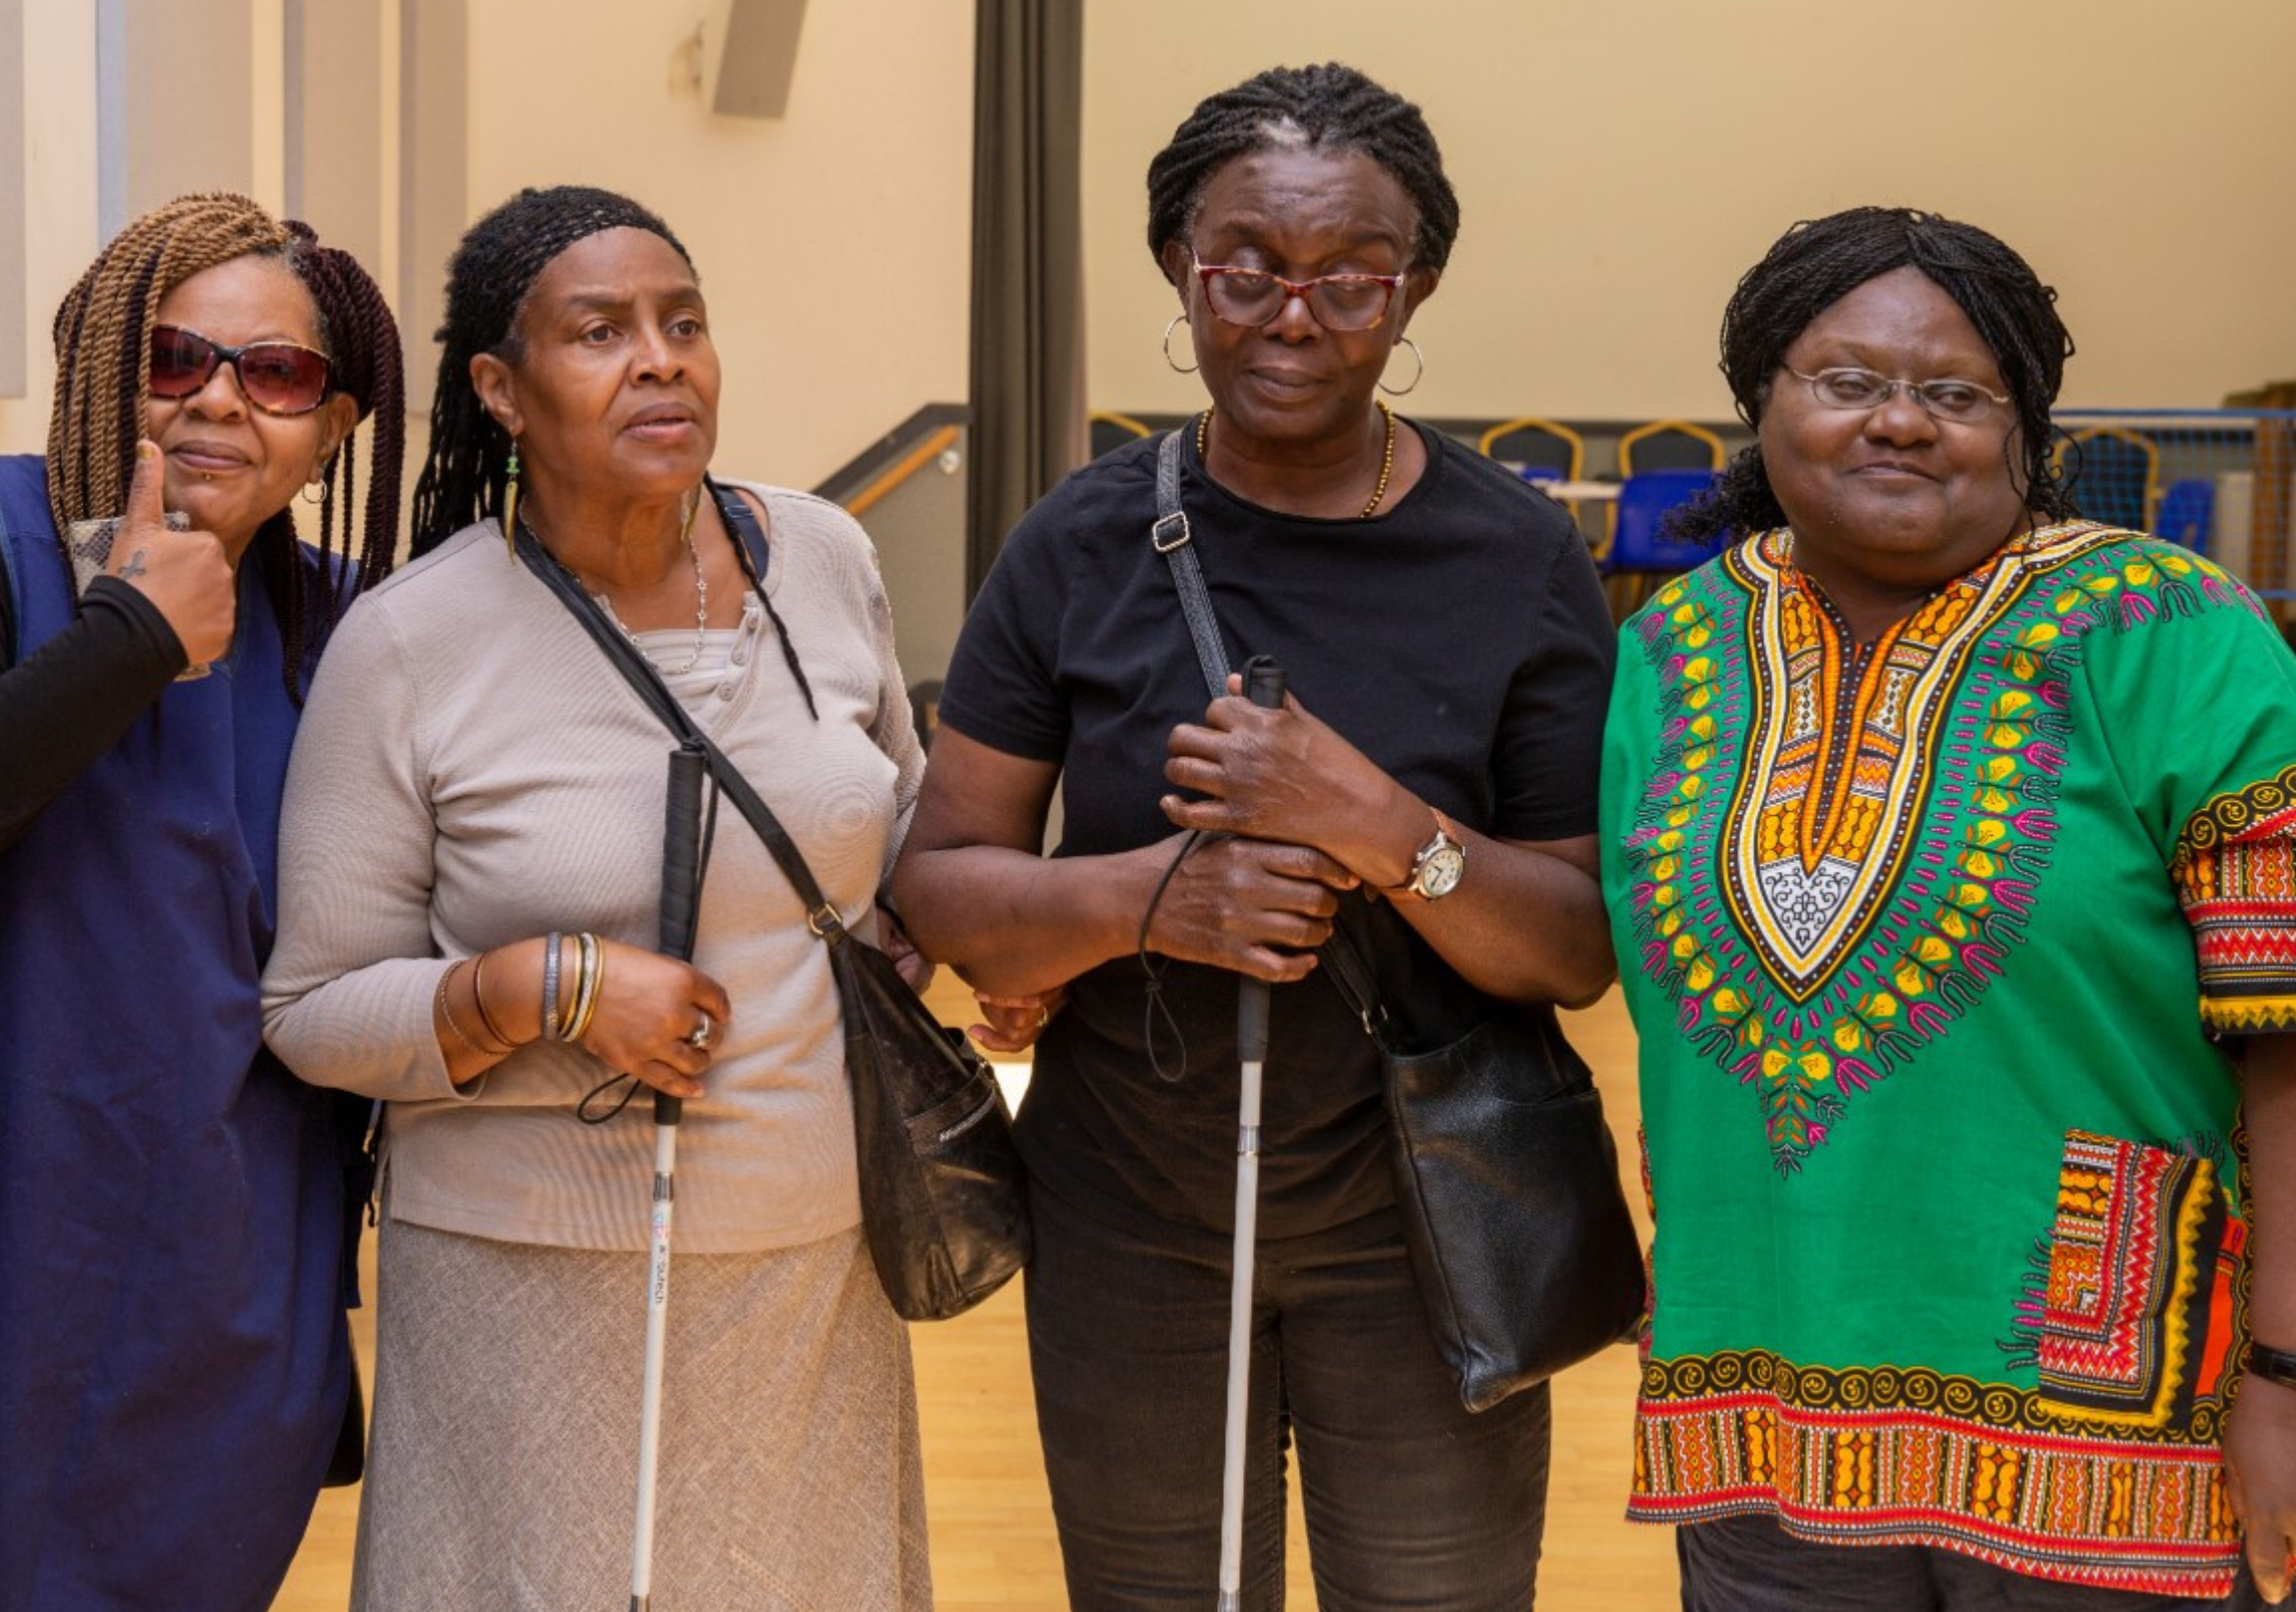 Four women from Croydon Vision line up in a row, two of whom are holding white canes